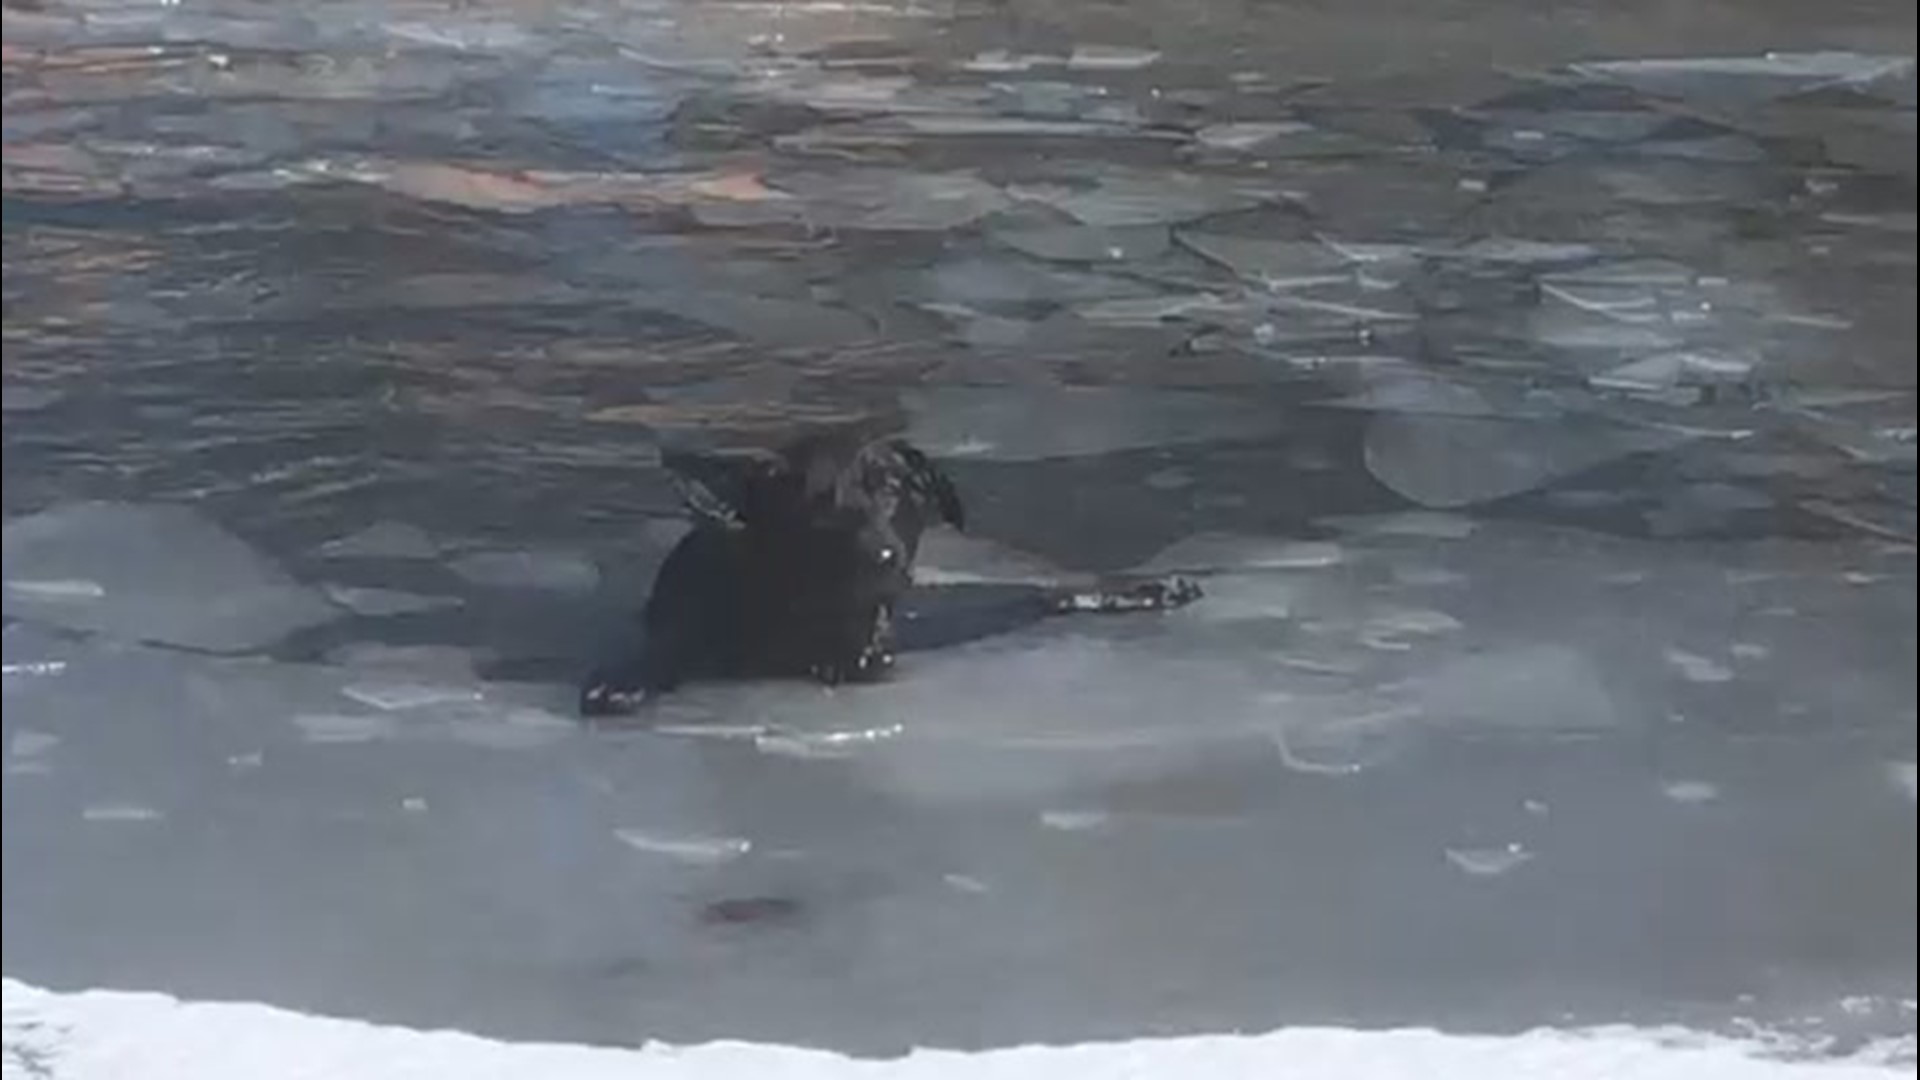 Police and firefighters in Walton Hills, Ohio, worked together to rescue a dog trapped in the middle of an icy pond on Friday, Feb. 21. The dog was a little cold and wet, but otherwise fine.